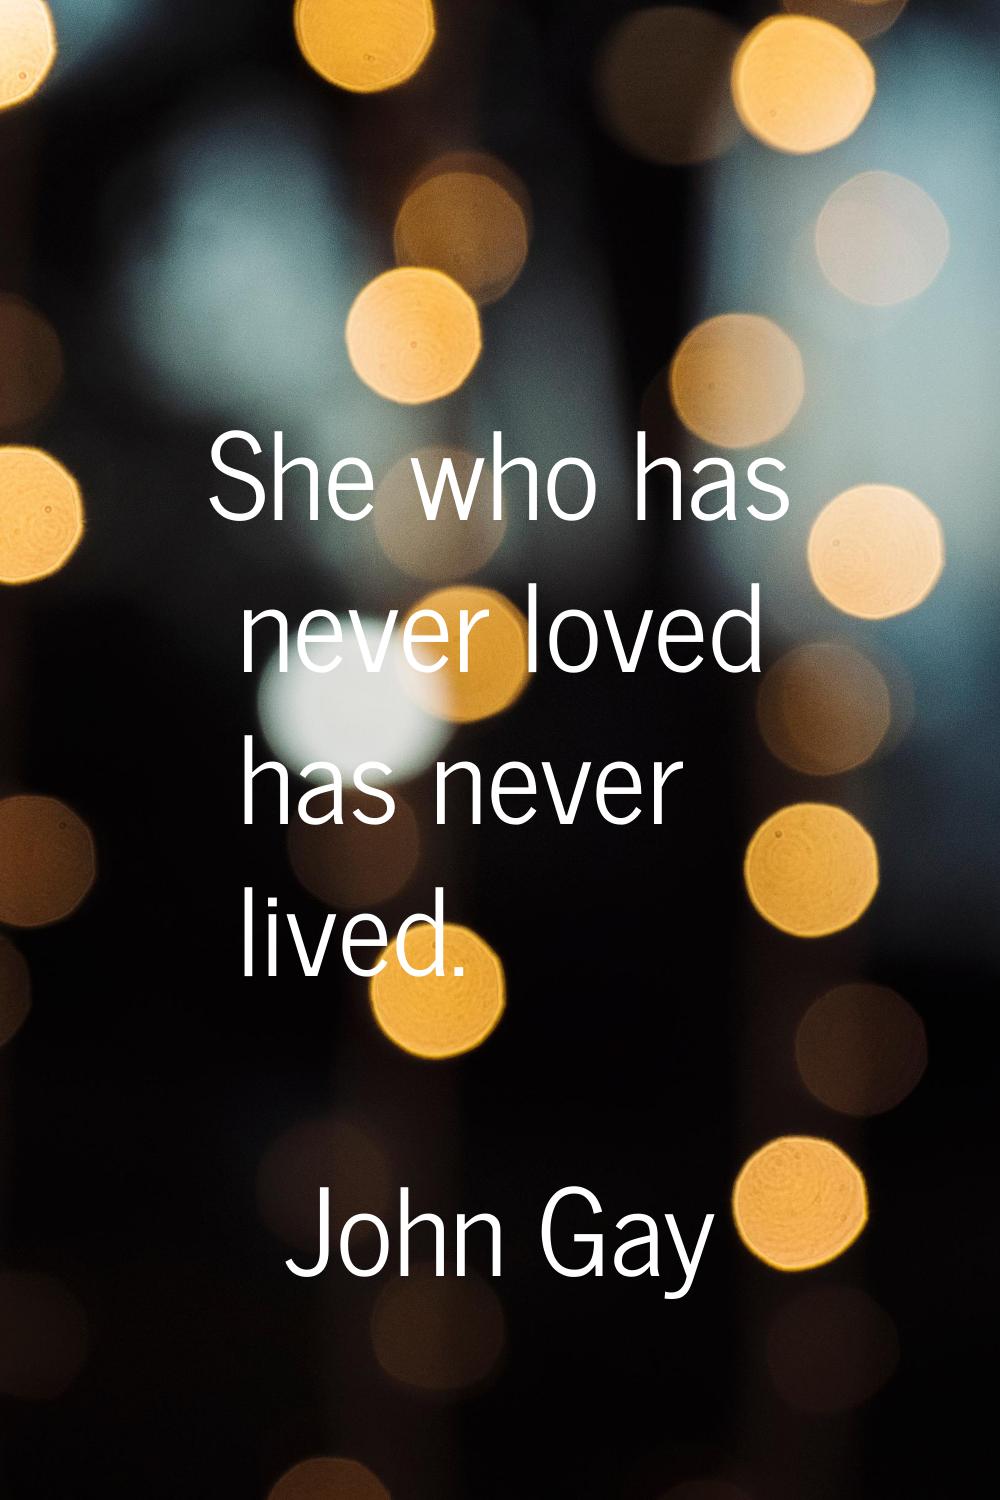 She who has never loved has never lived.